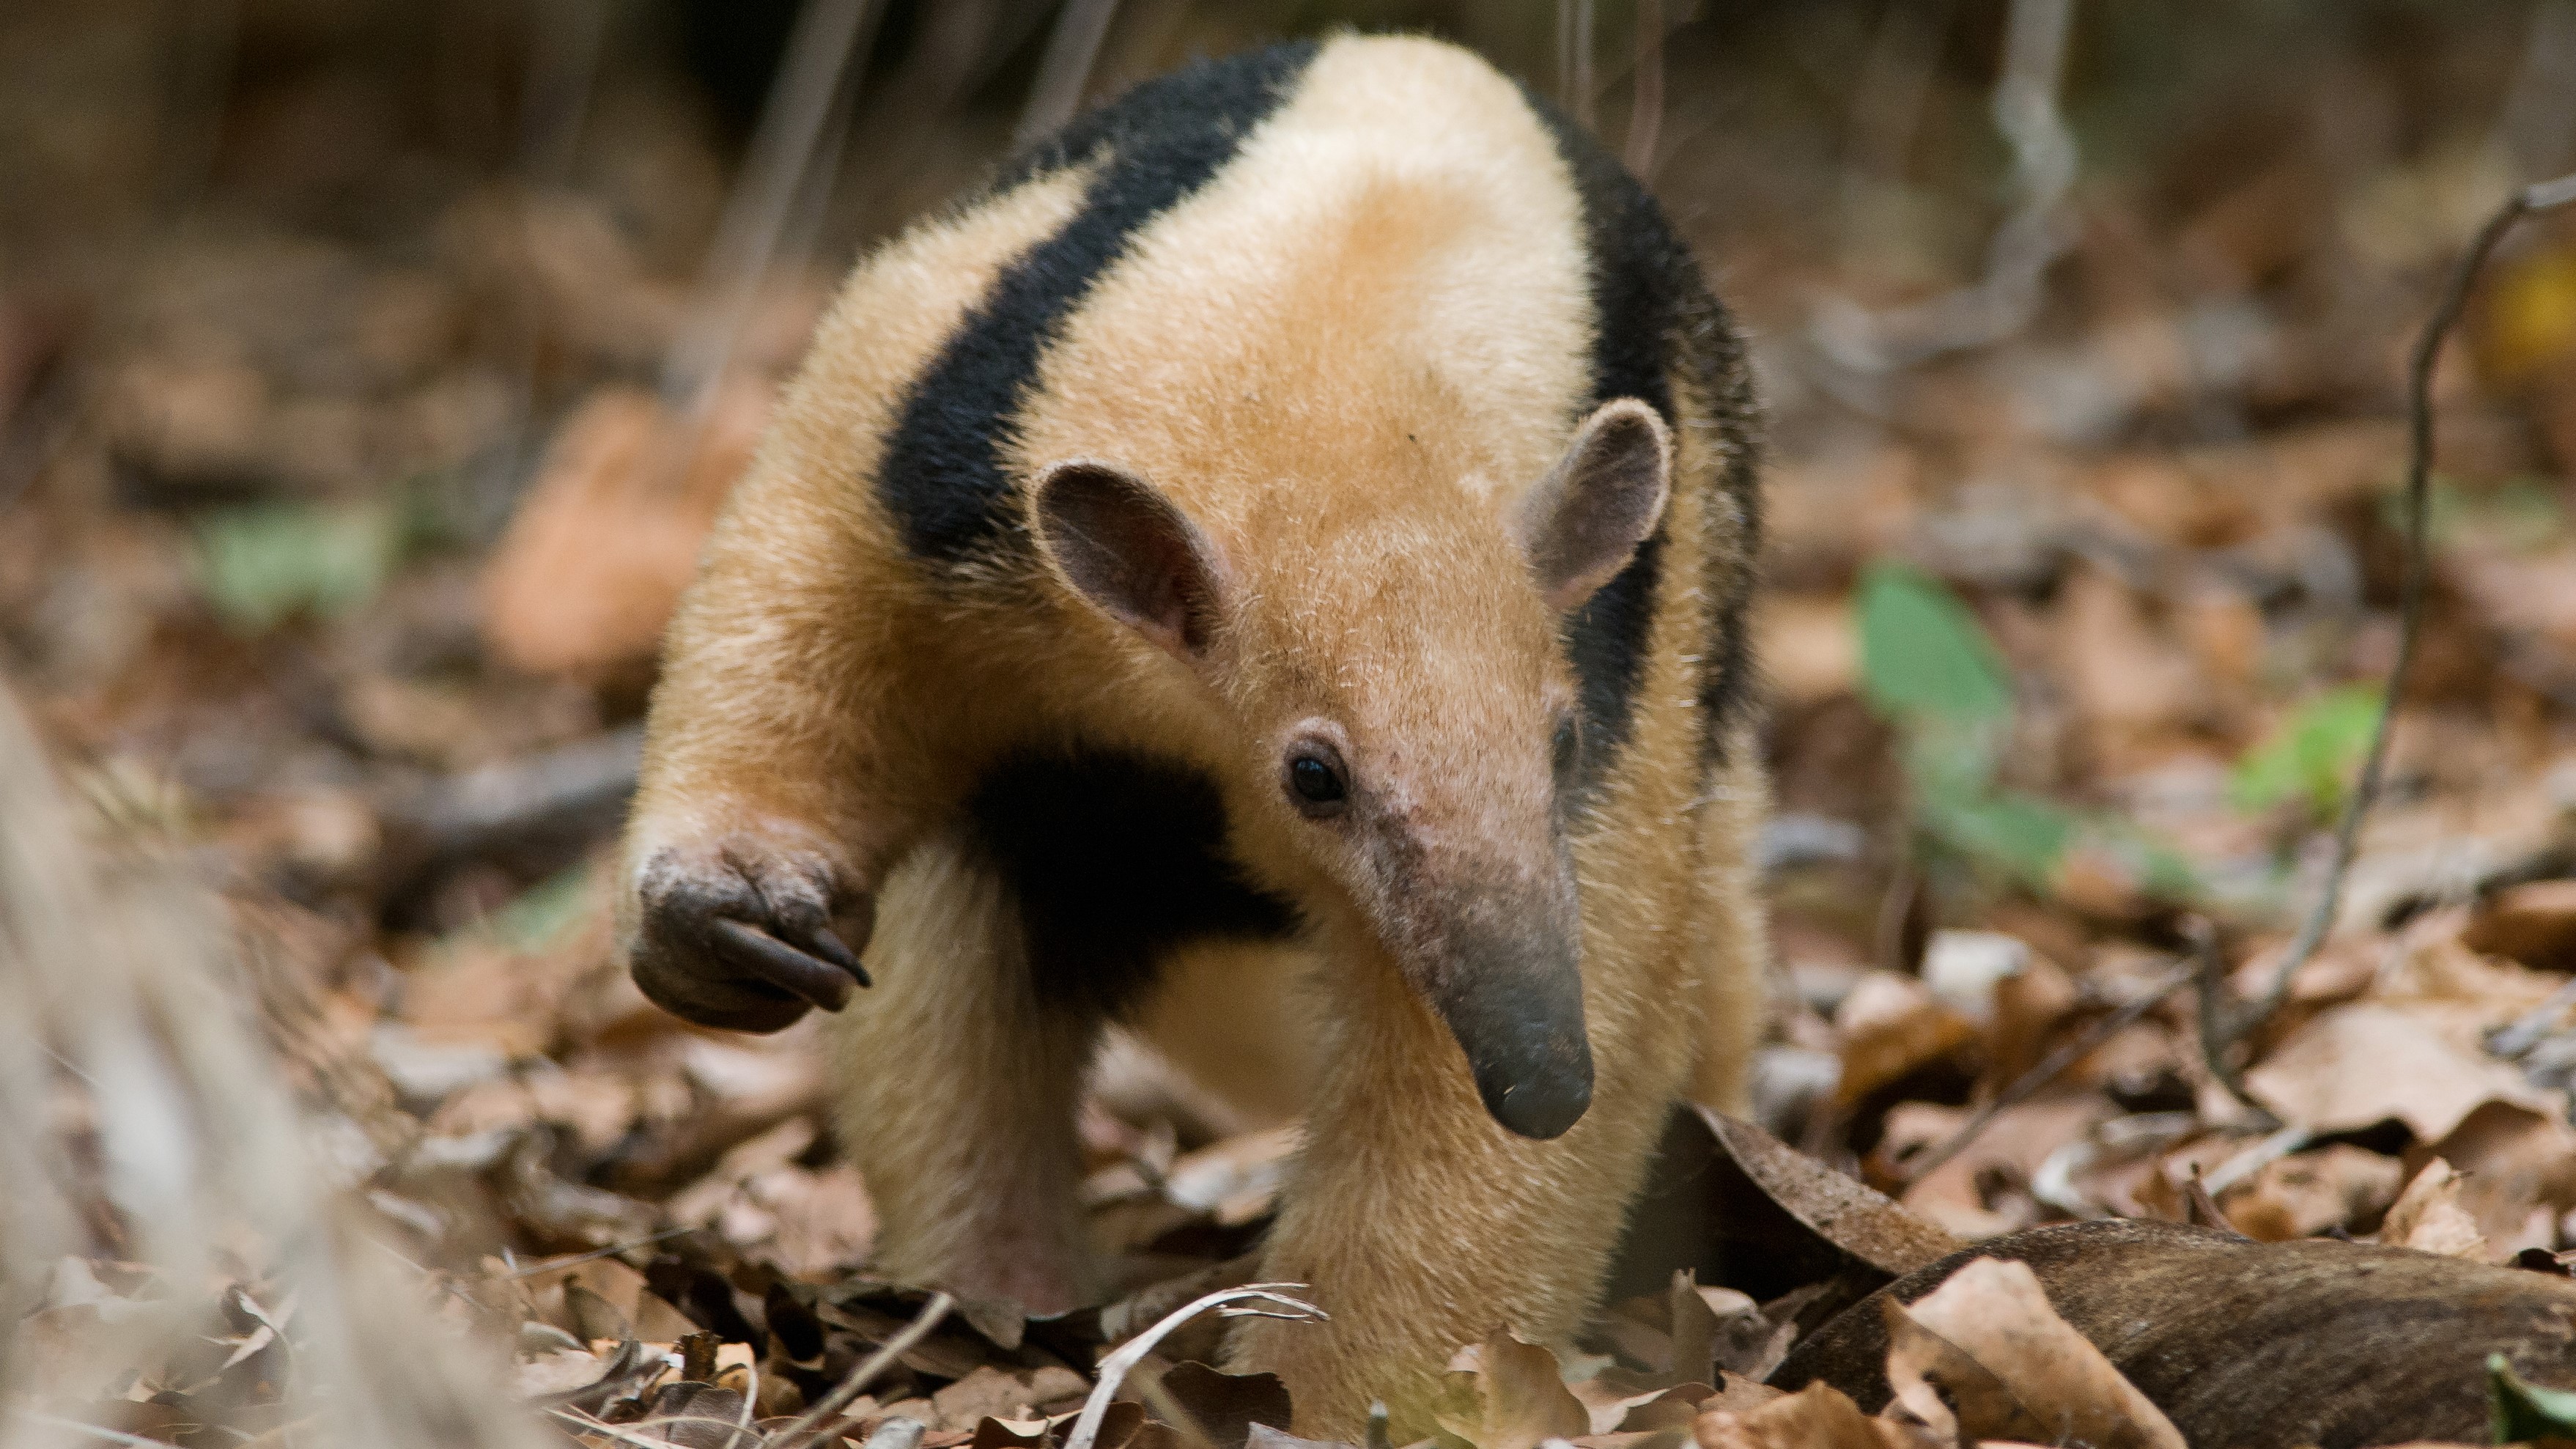 Zoo anteater exposed people to rabies in first-of-its-kind case | Live  Science